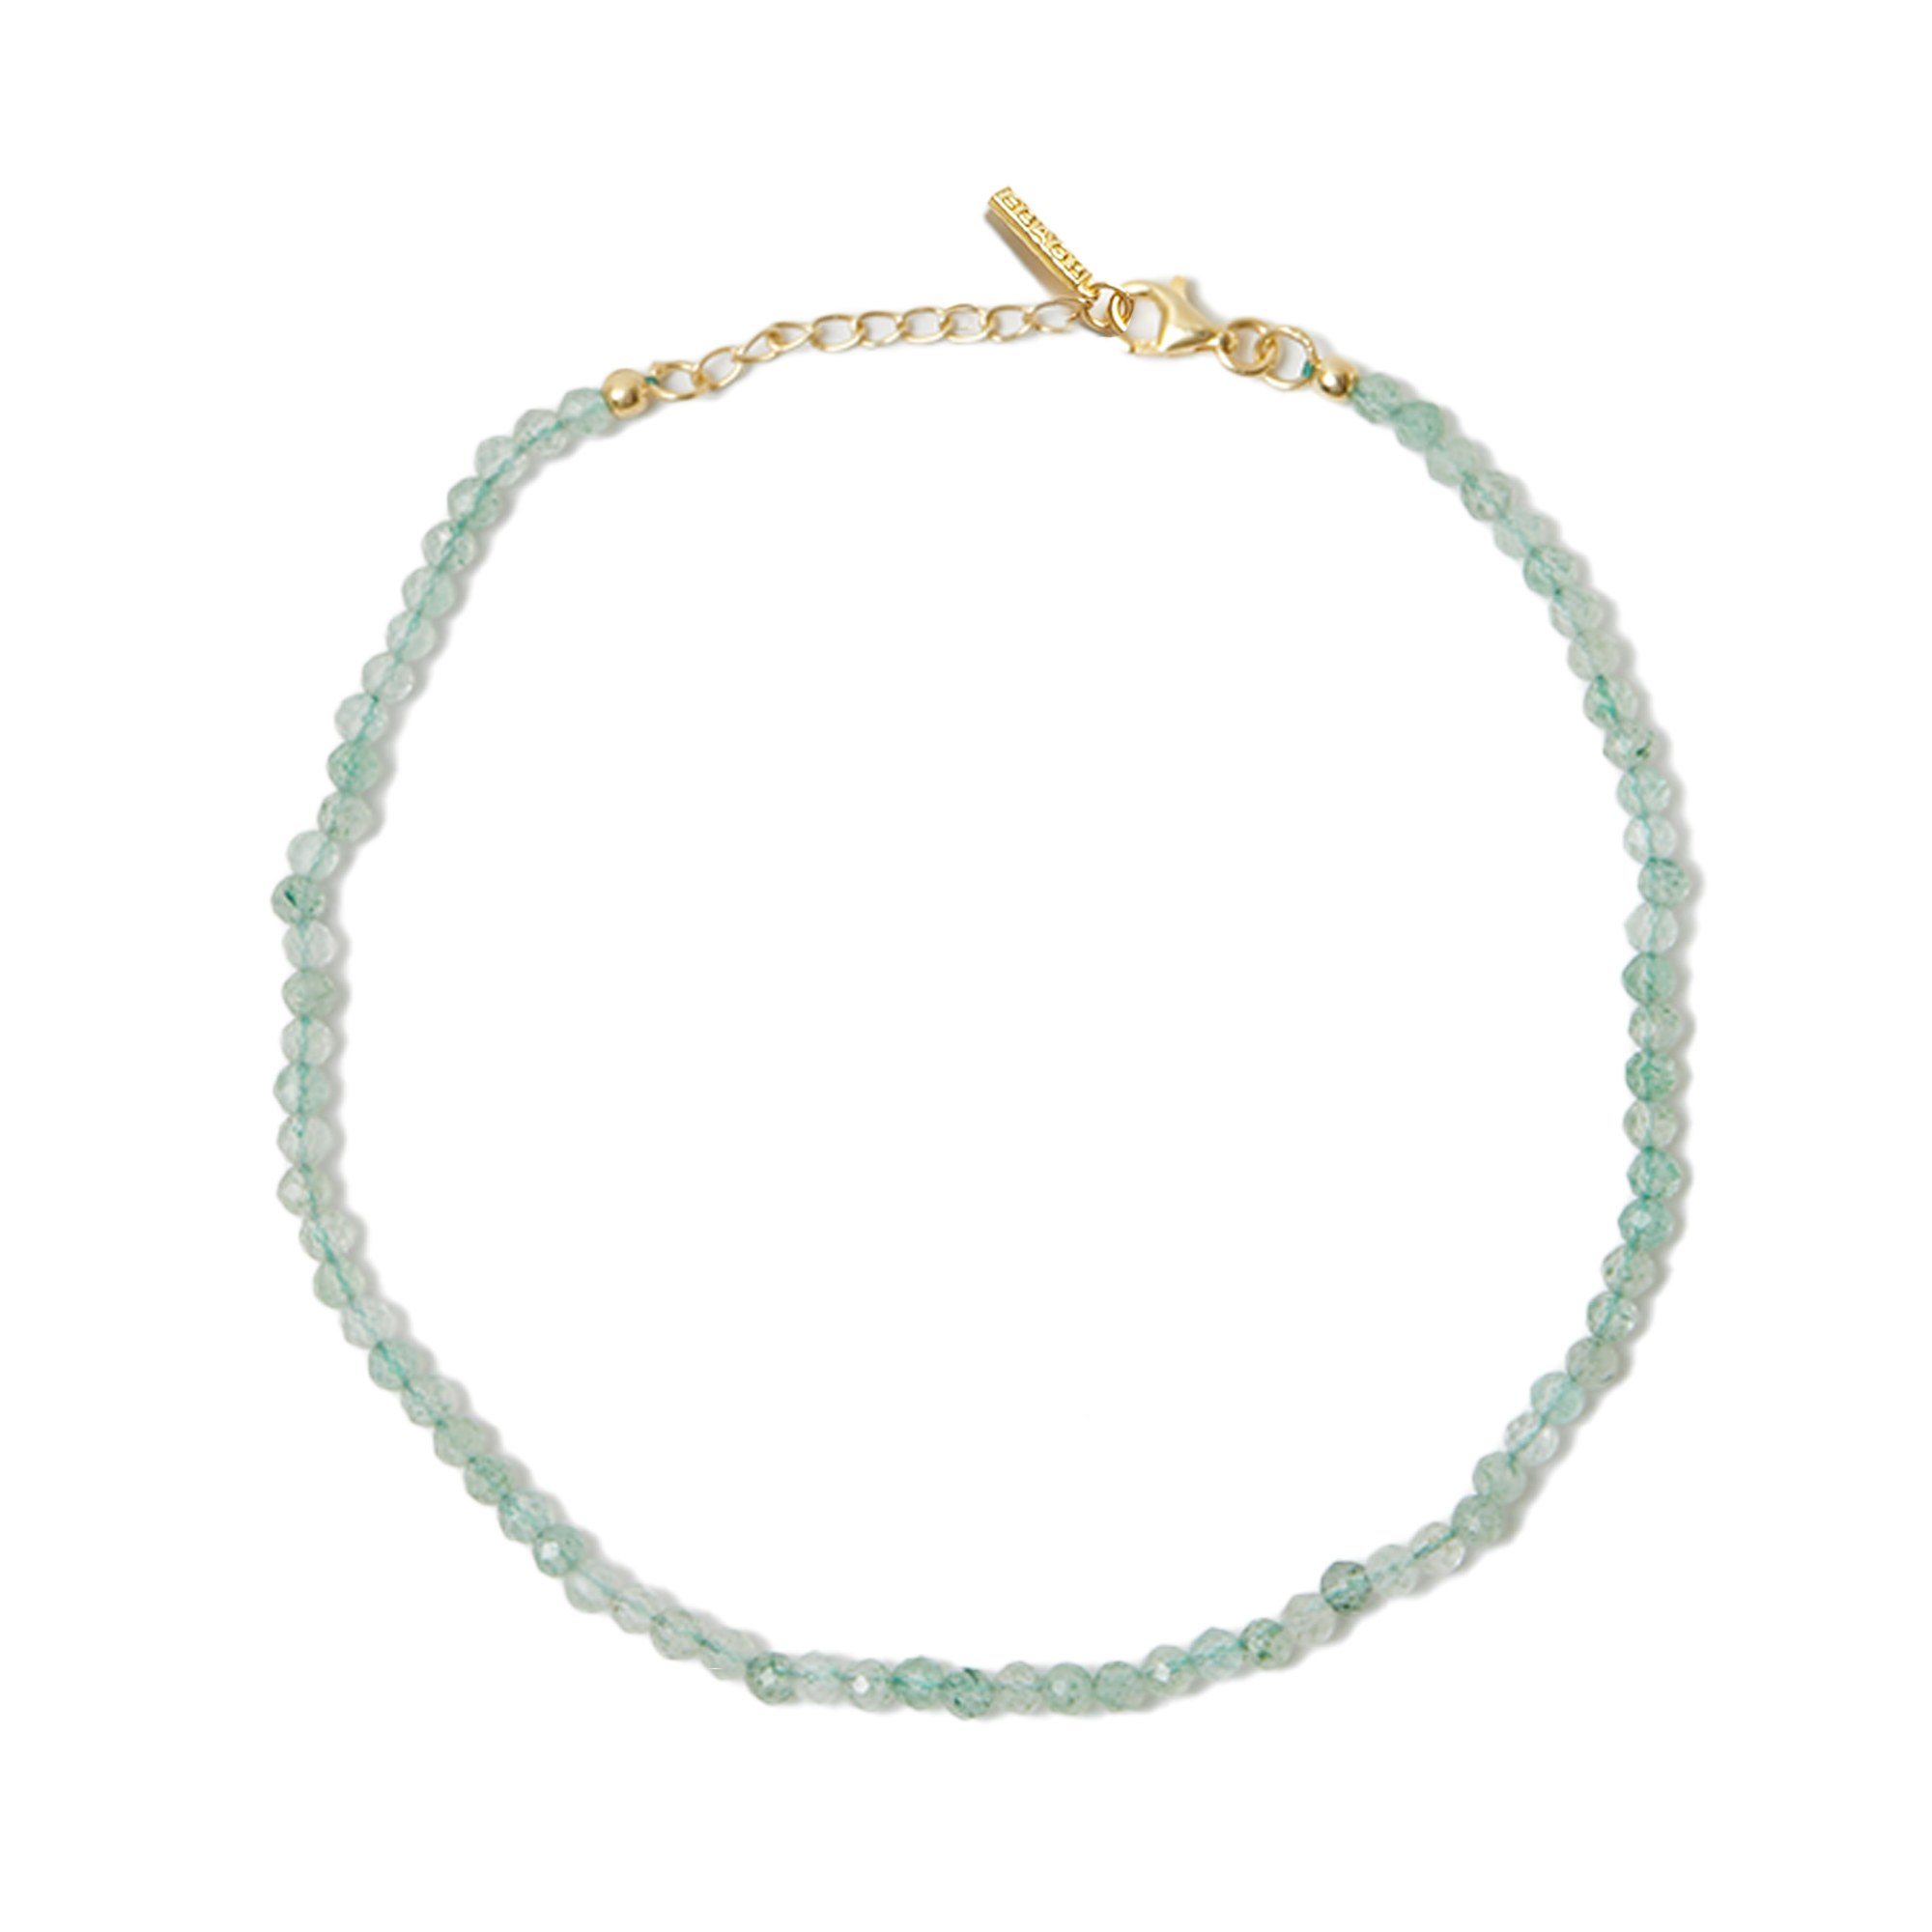 THE EVERLY ANKLET